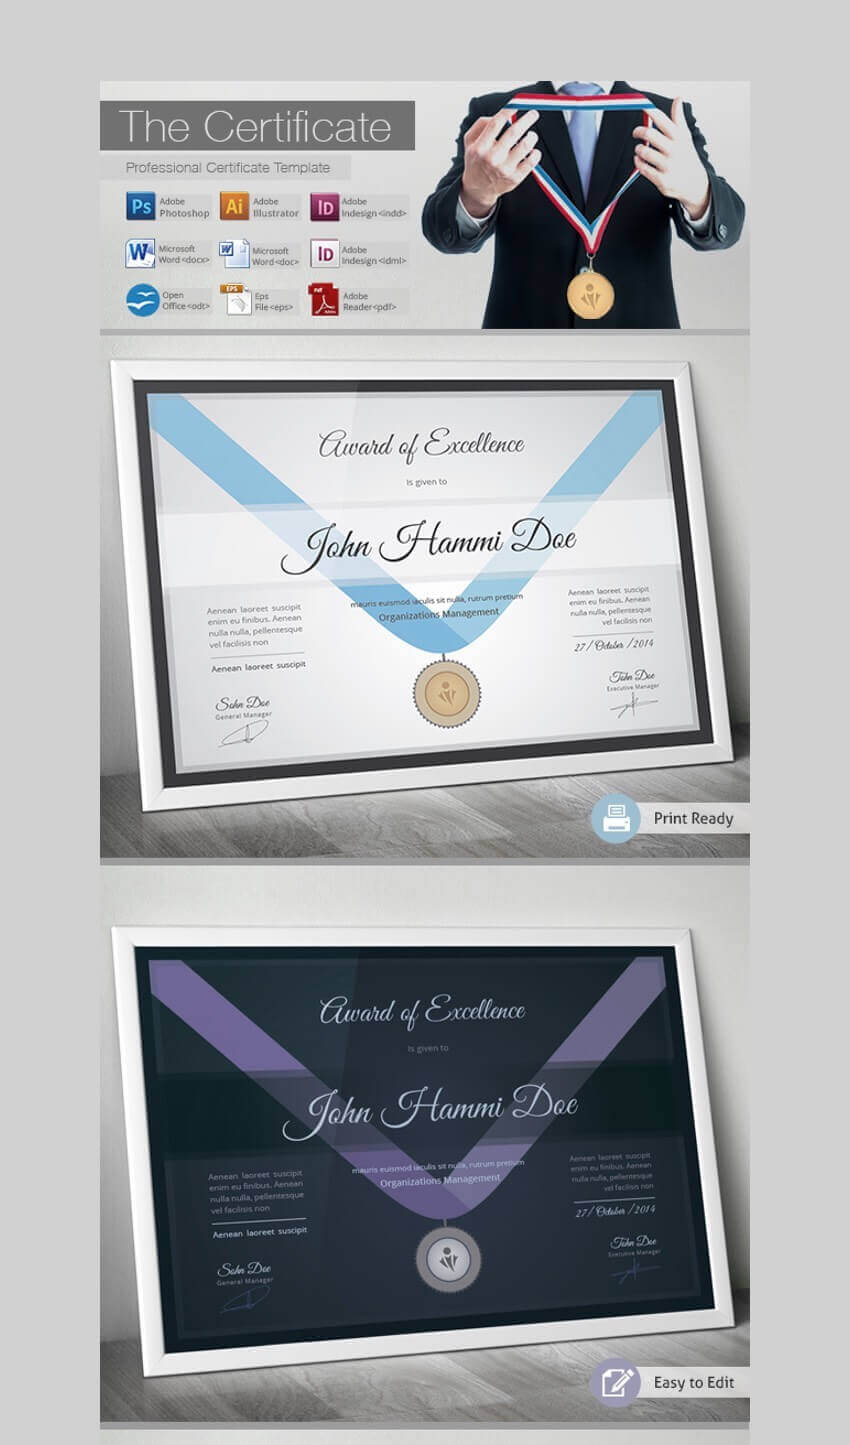 20 Best Free Microsoft Word Certificate Templates (Downloads With No Certificate Templates Could Be Found